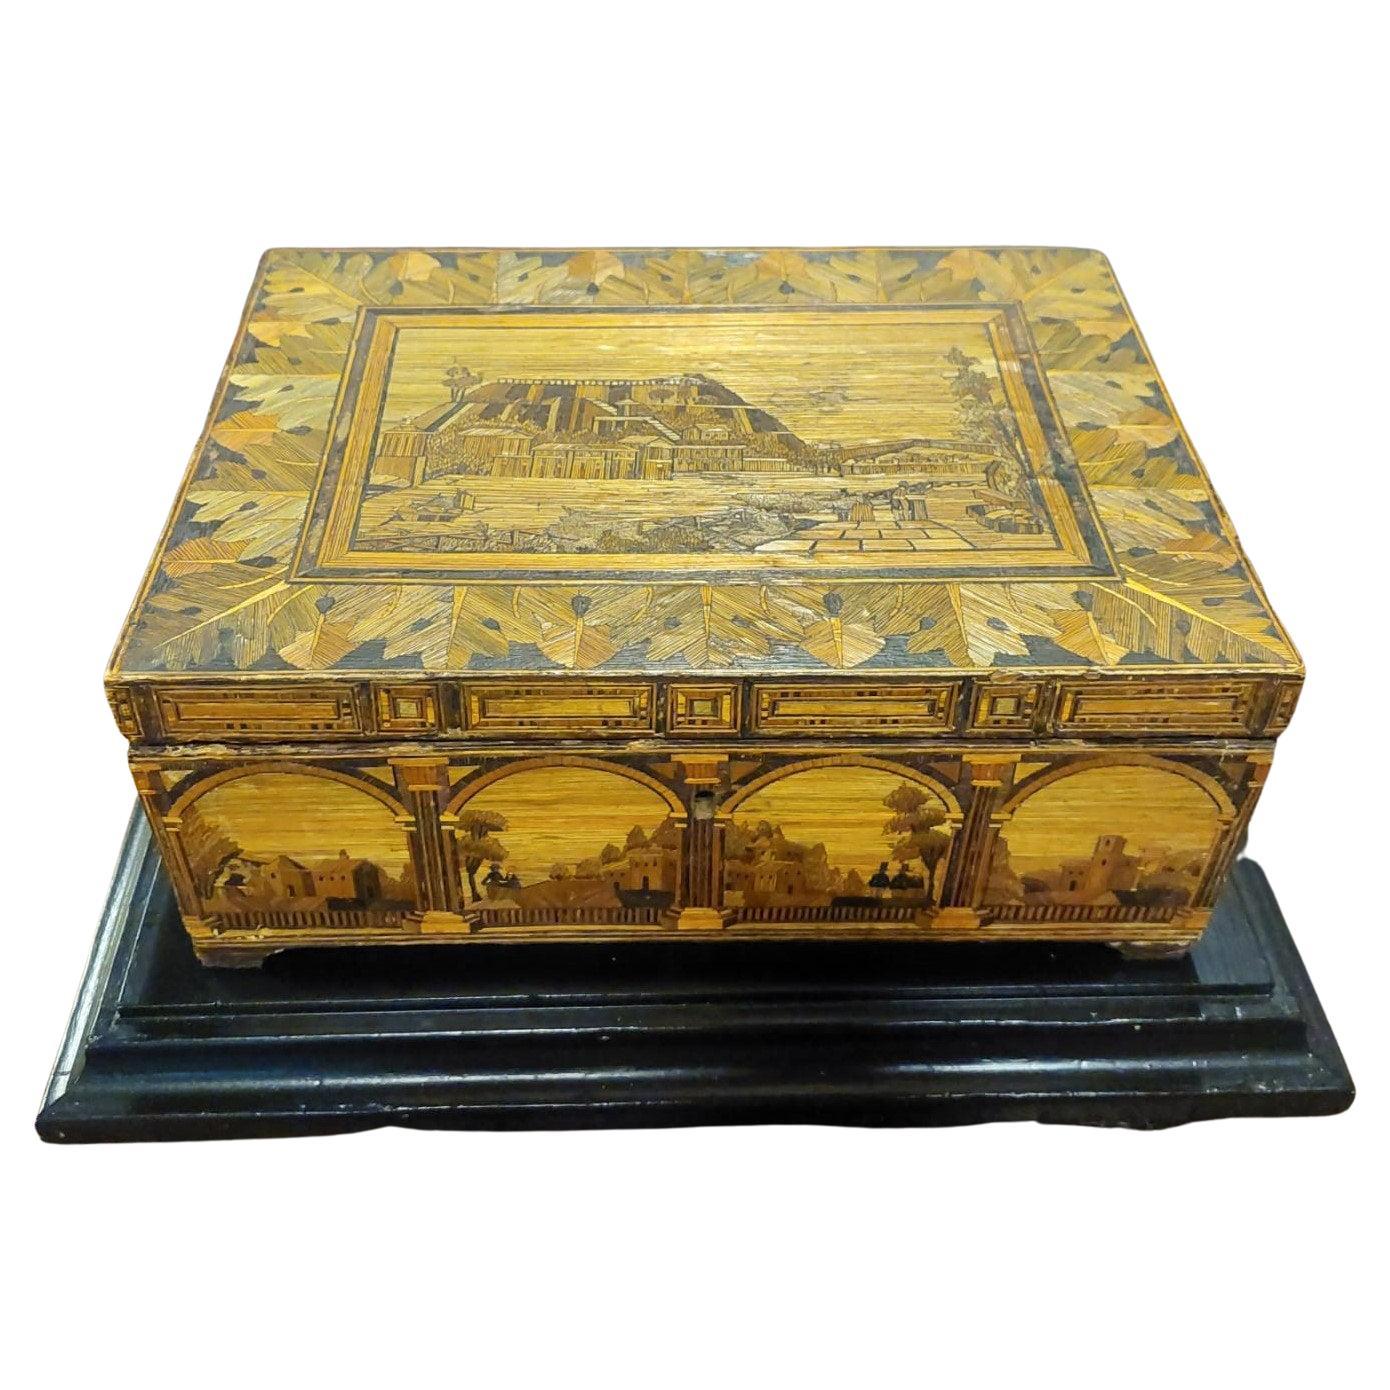 Antique Box in Inlaid Straw Threads, Classic Landscapes on All Sides, '800 Italy